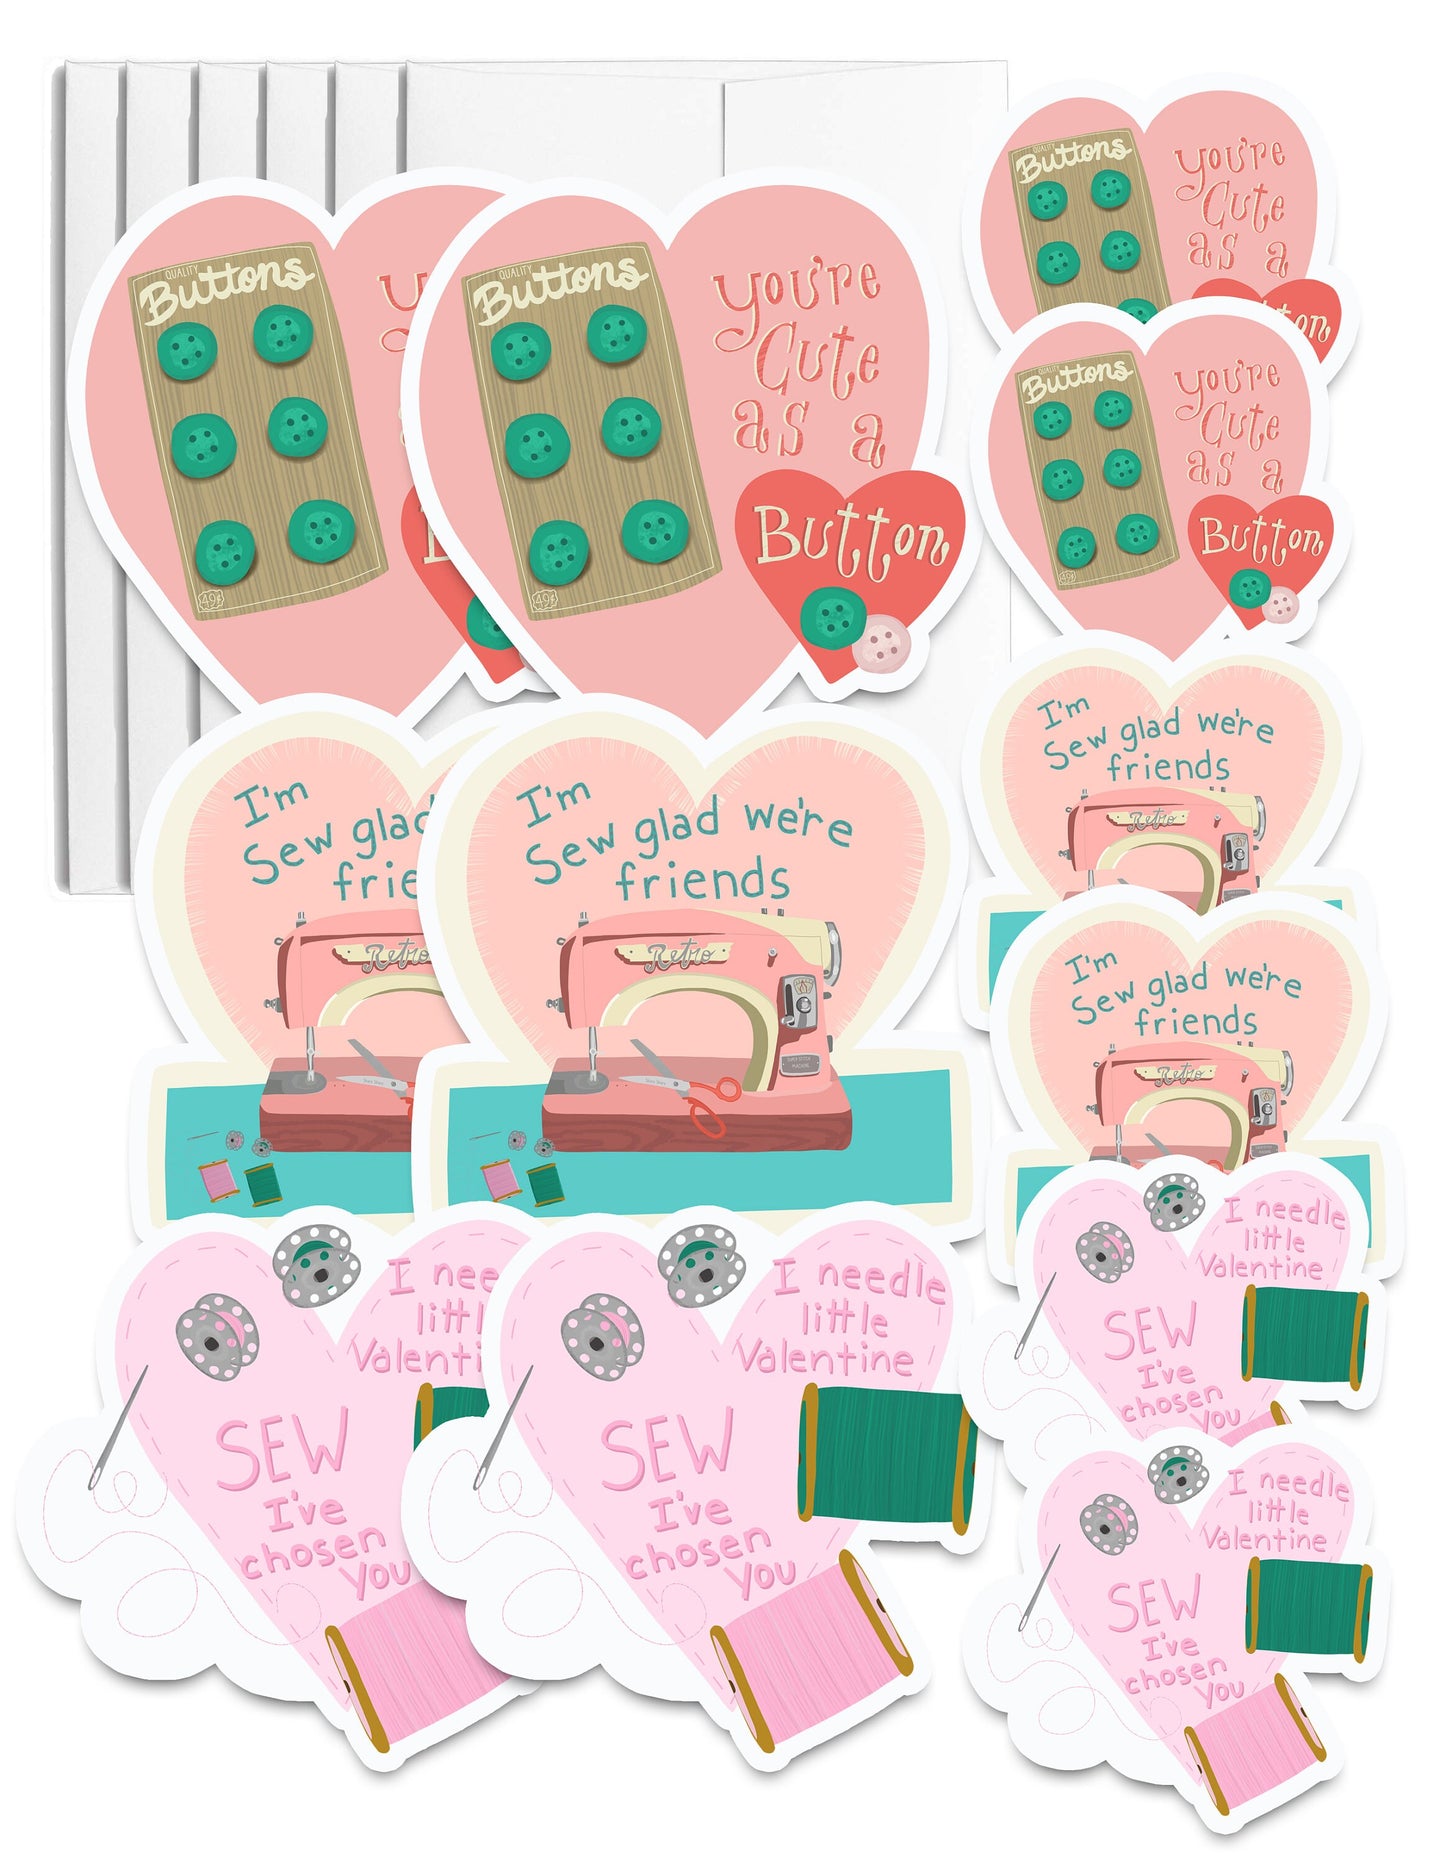 Set of 6 Sewing Valentines, Envelopes, and 6 matching stickers